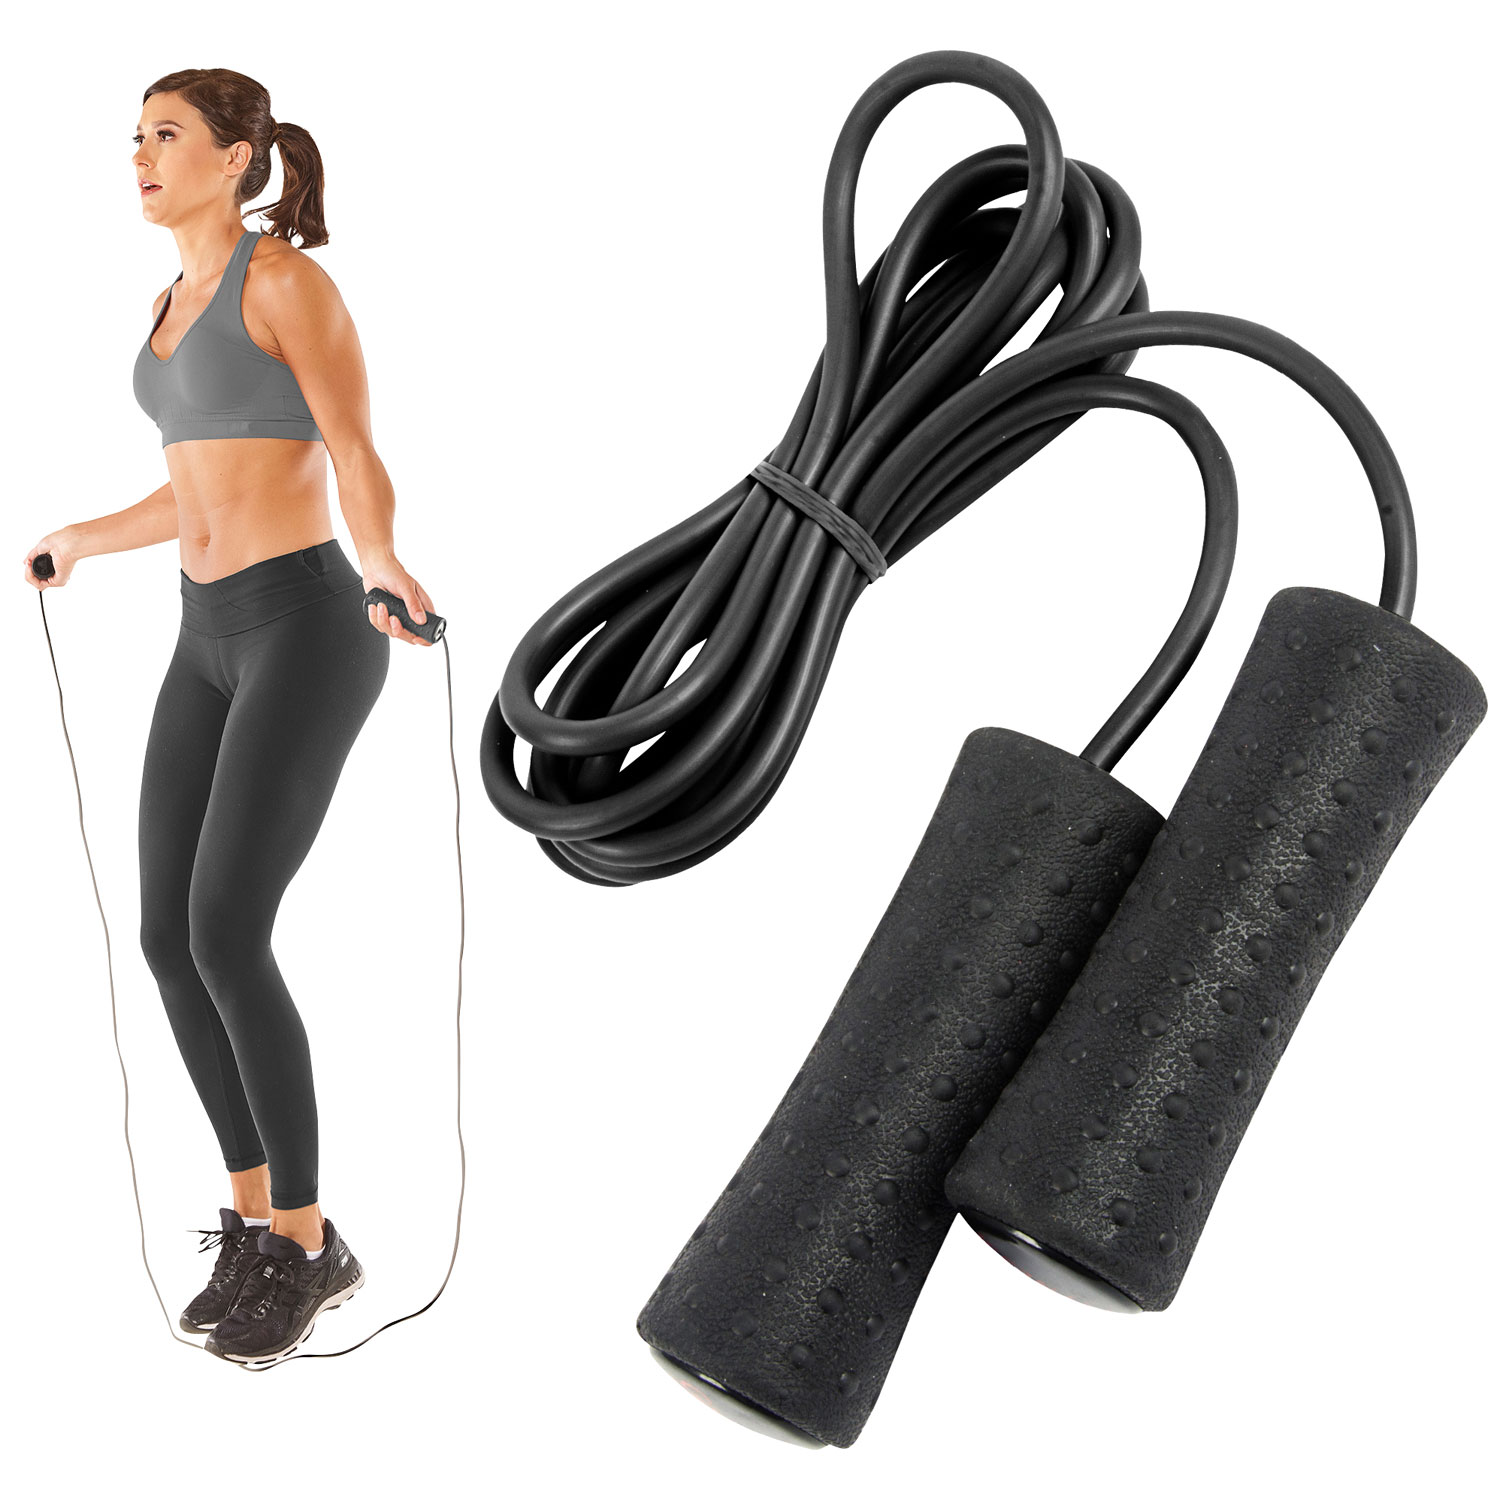 My Stupidly Long Search For The Best Jump Rope Footwear (Why